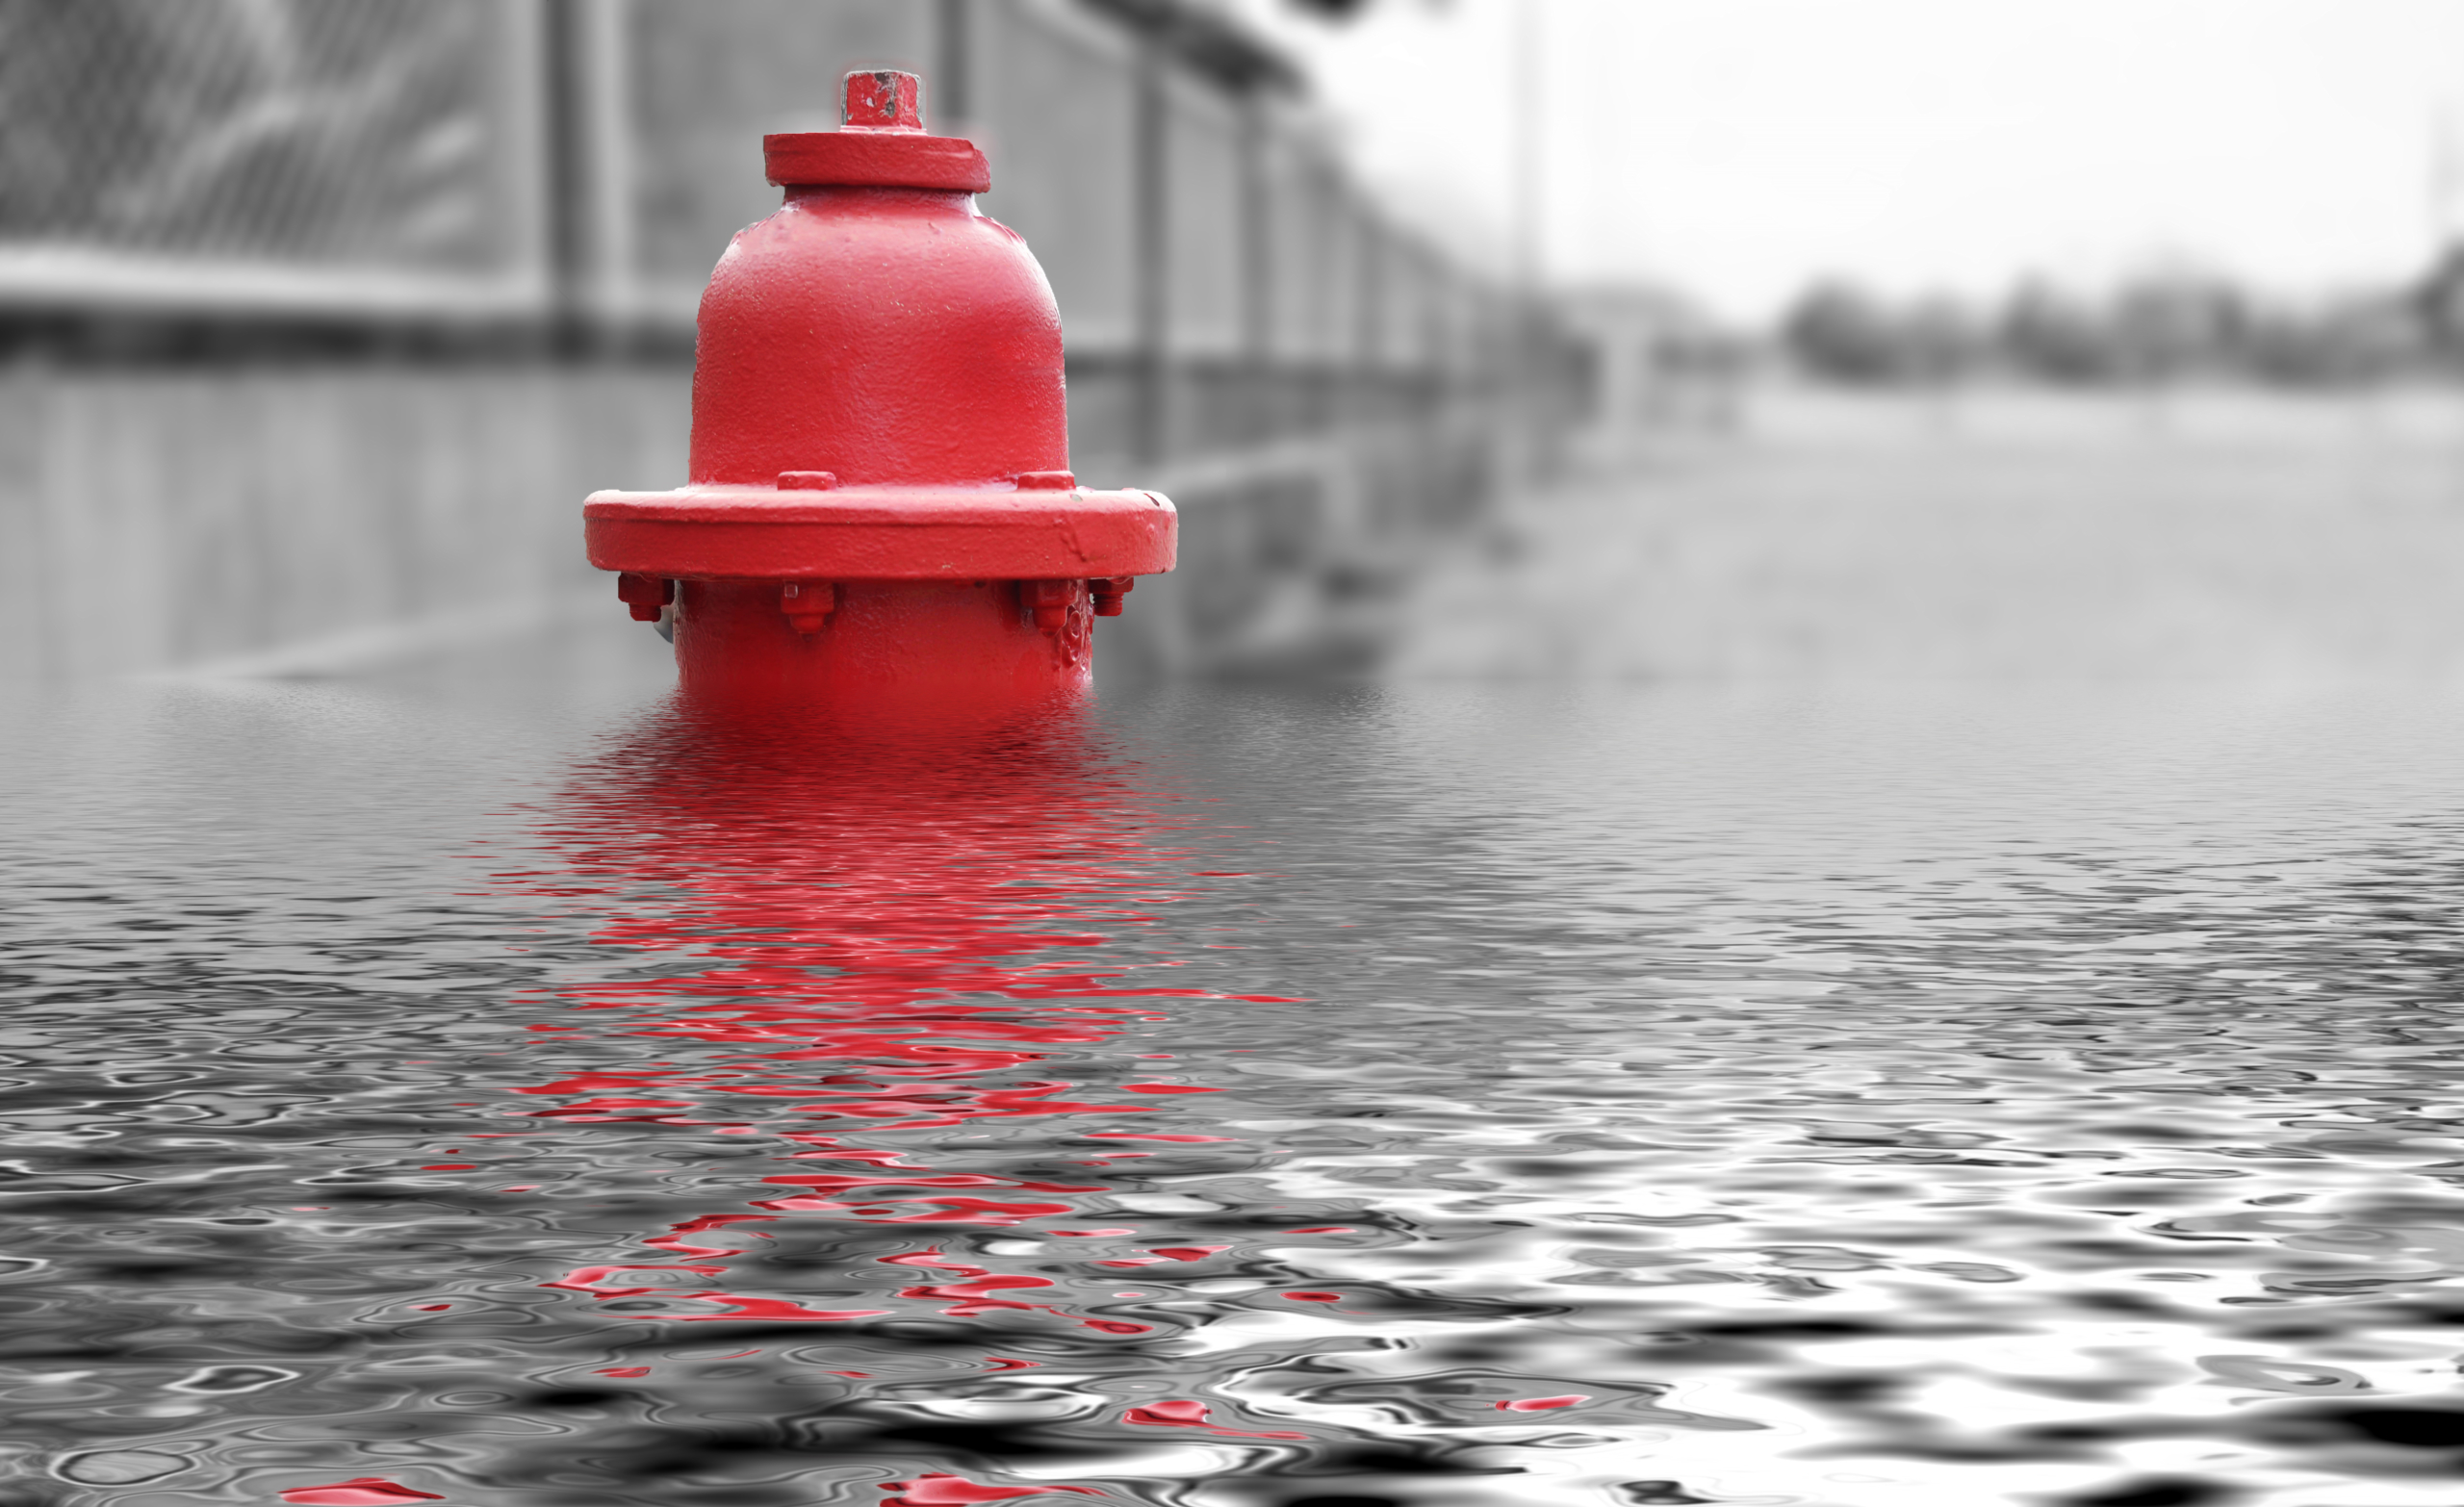 fire hydrant in water